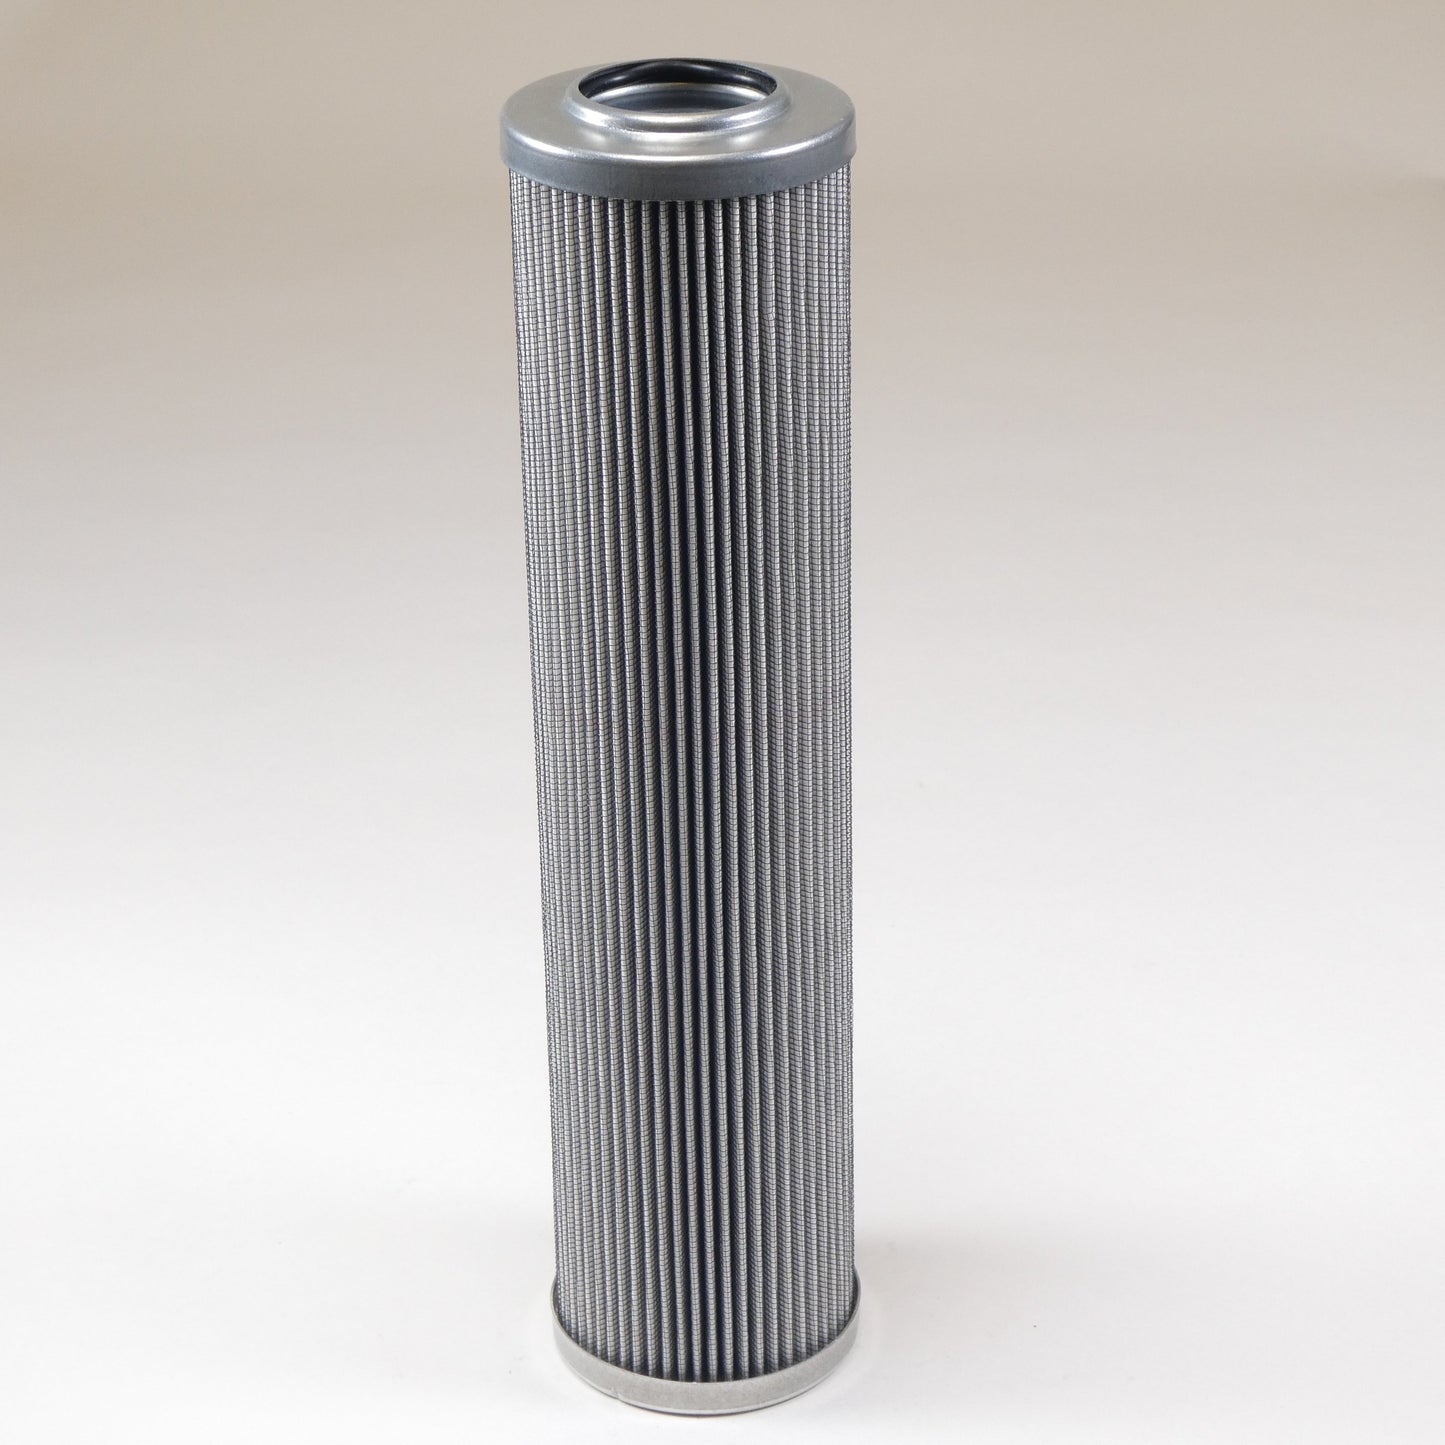 Hydrafil Replacement Filter Element for Internormen 05.9600.25VG.10.E.P.13